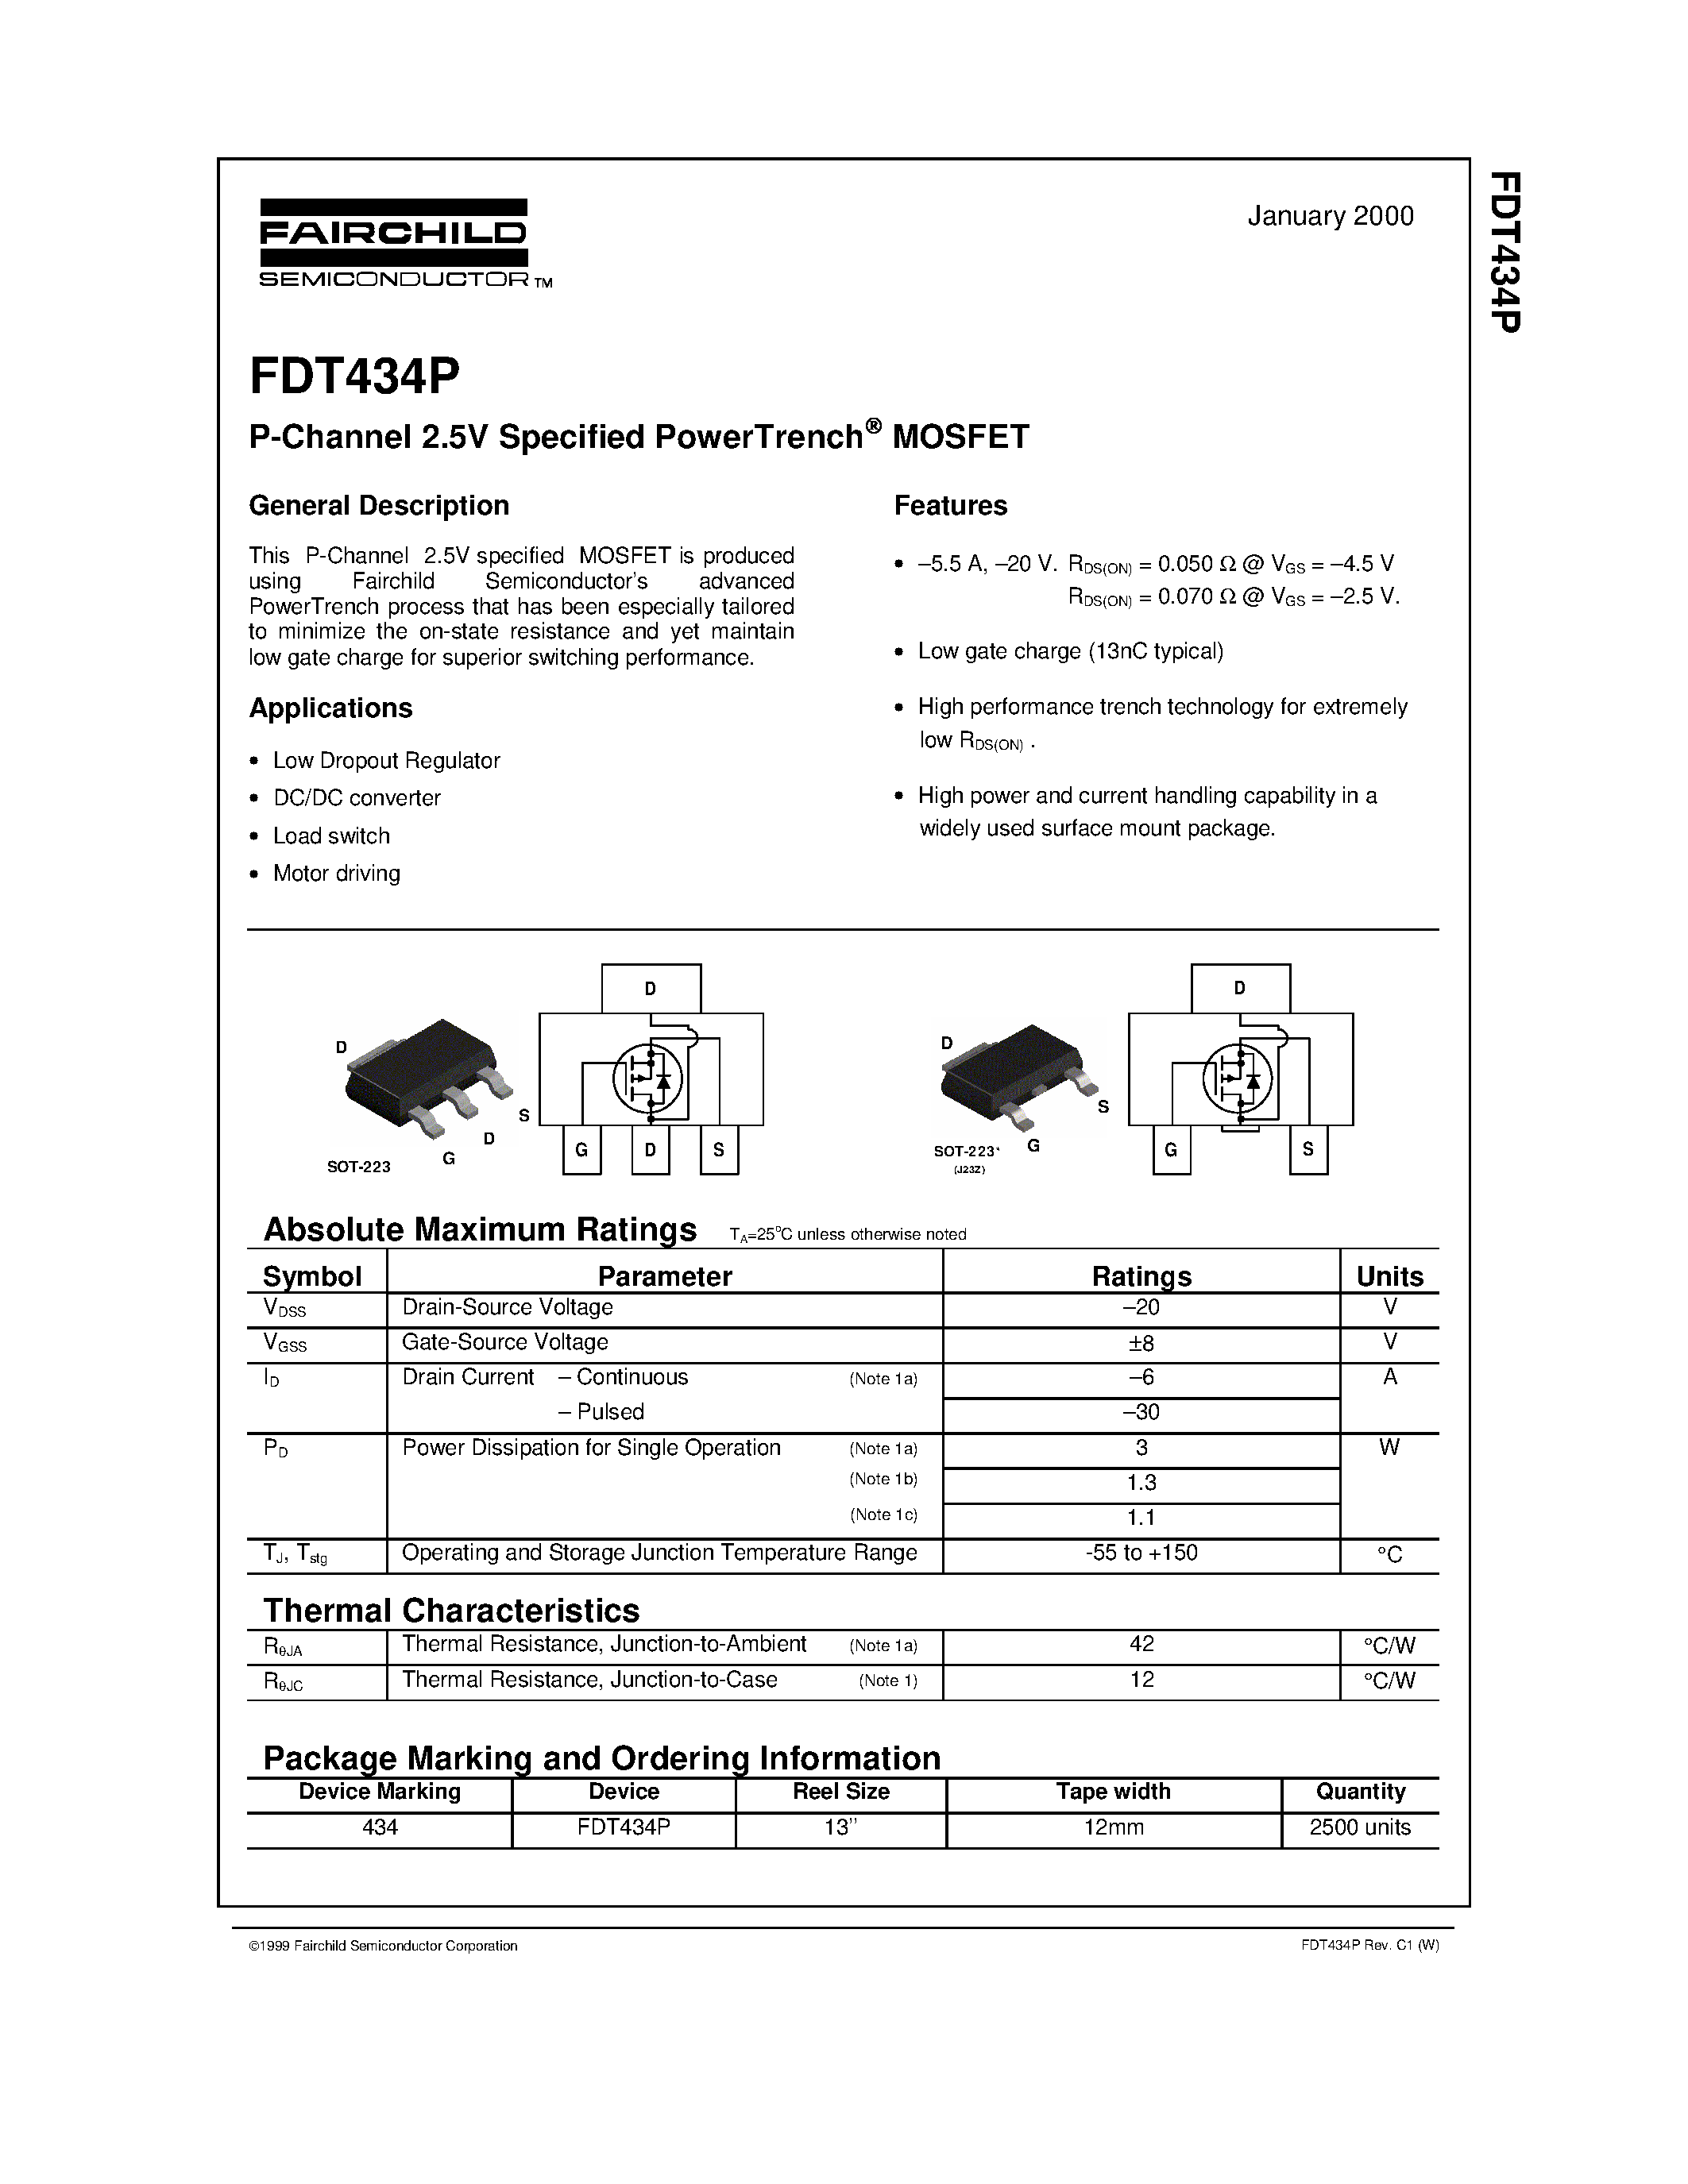 Даташит FDT434-P-Channel 2.5V Specified PowerTrench MOSFET страница 1